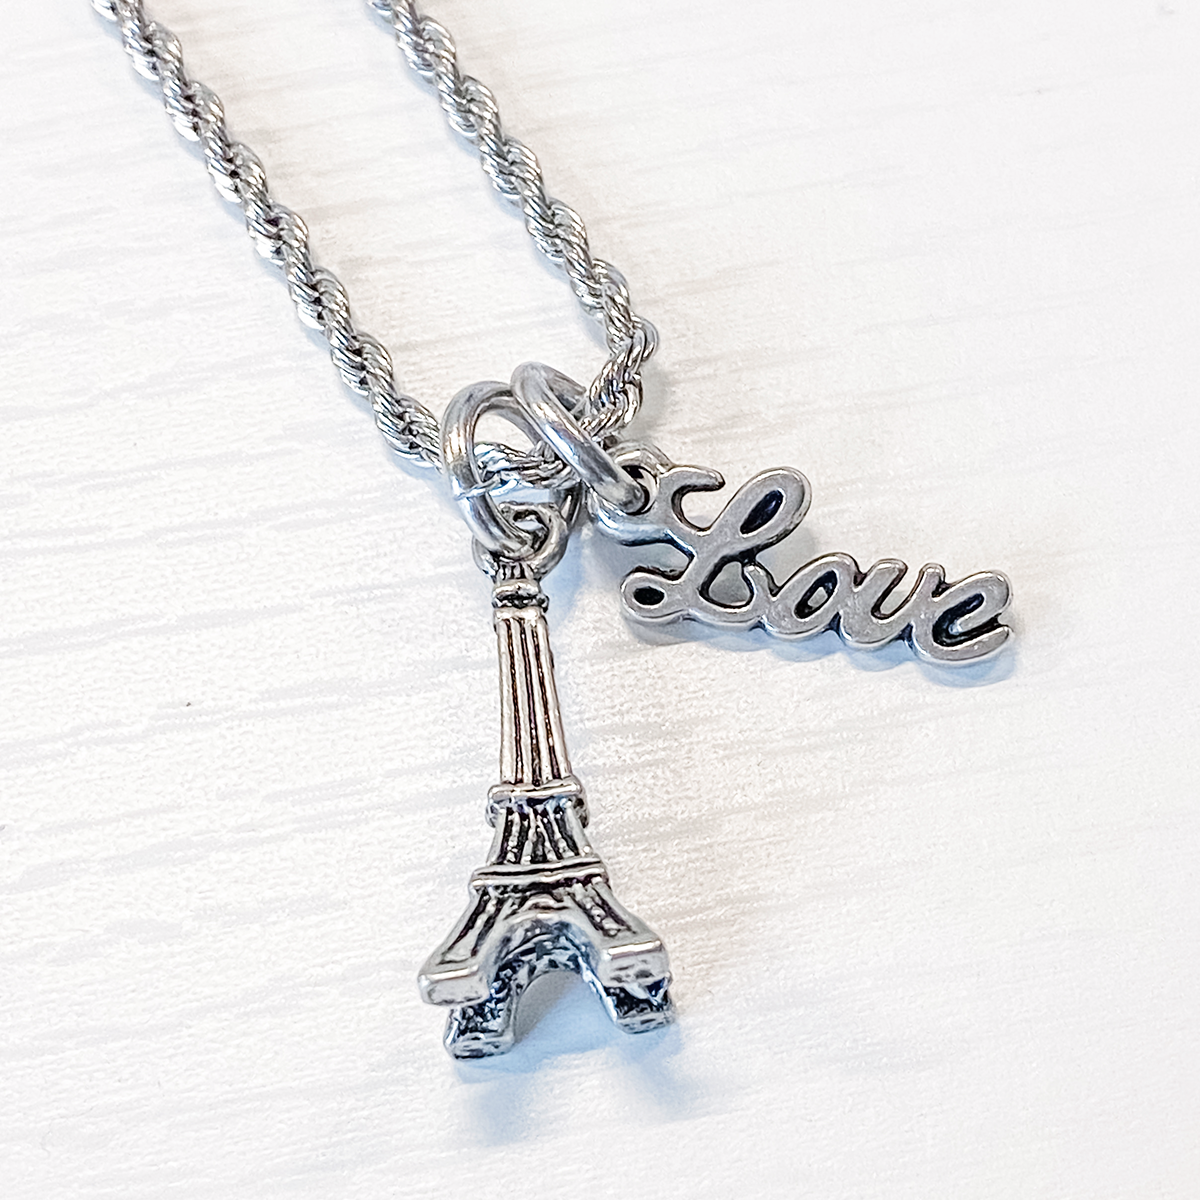 Eiffel Tower Pewter Love Charm Rope Necklace 20"